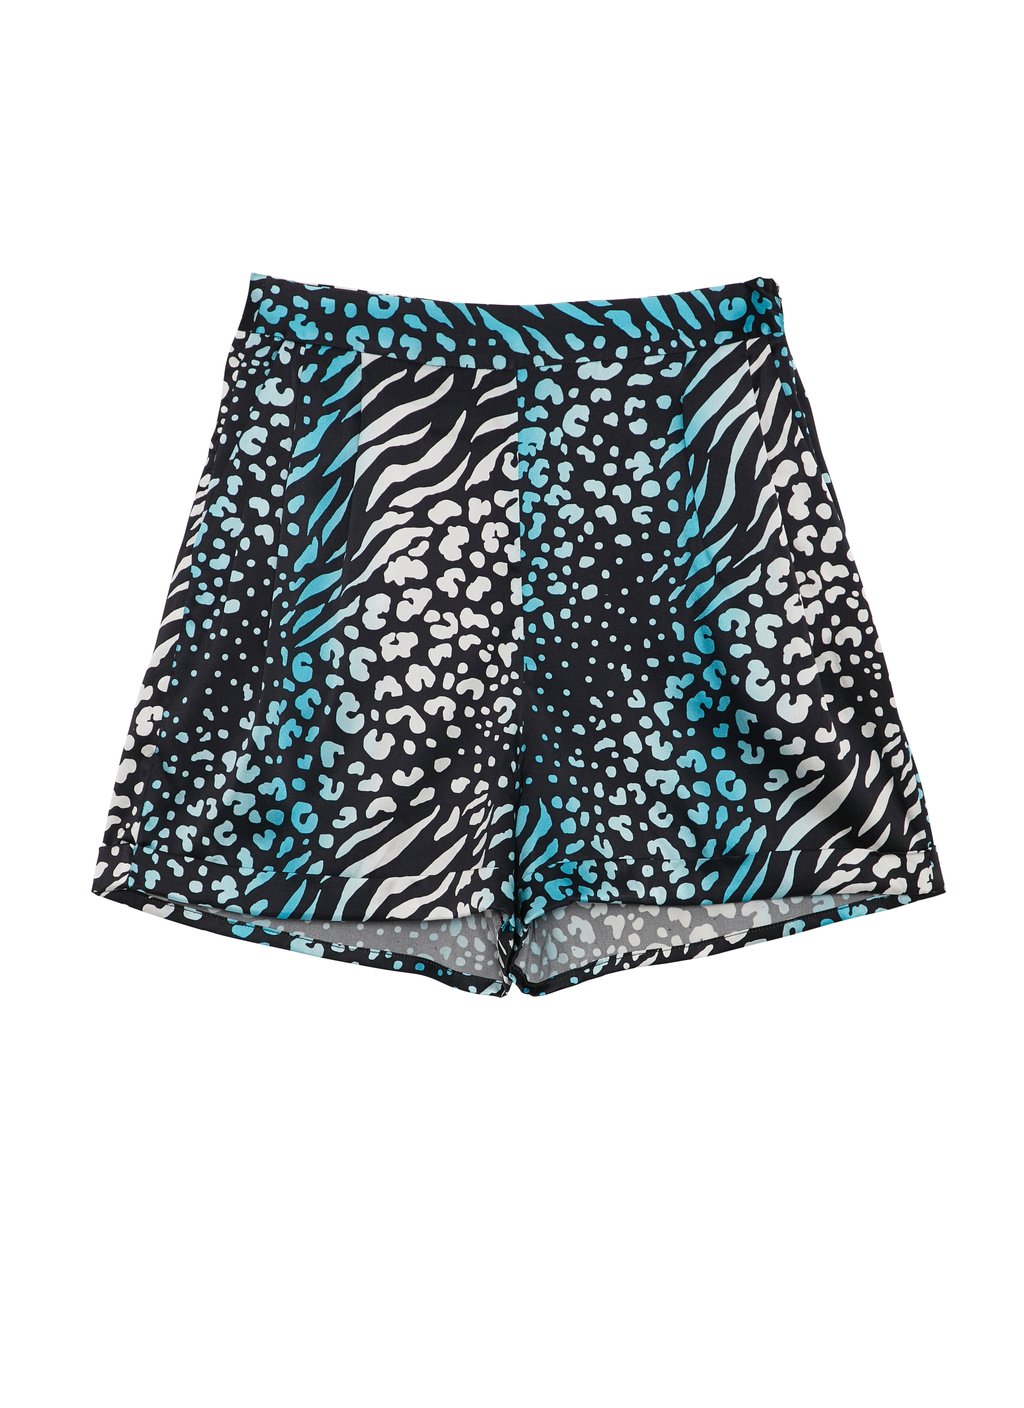 BLUE LEOPARD Tailored Shorts